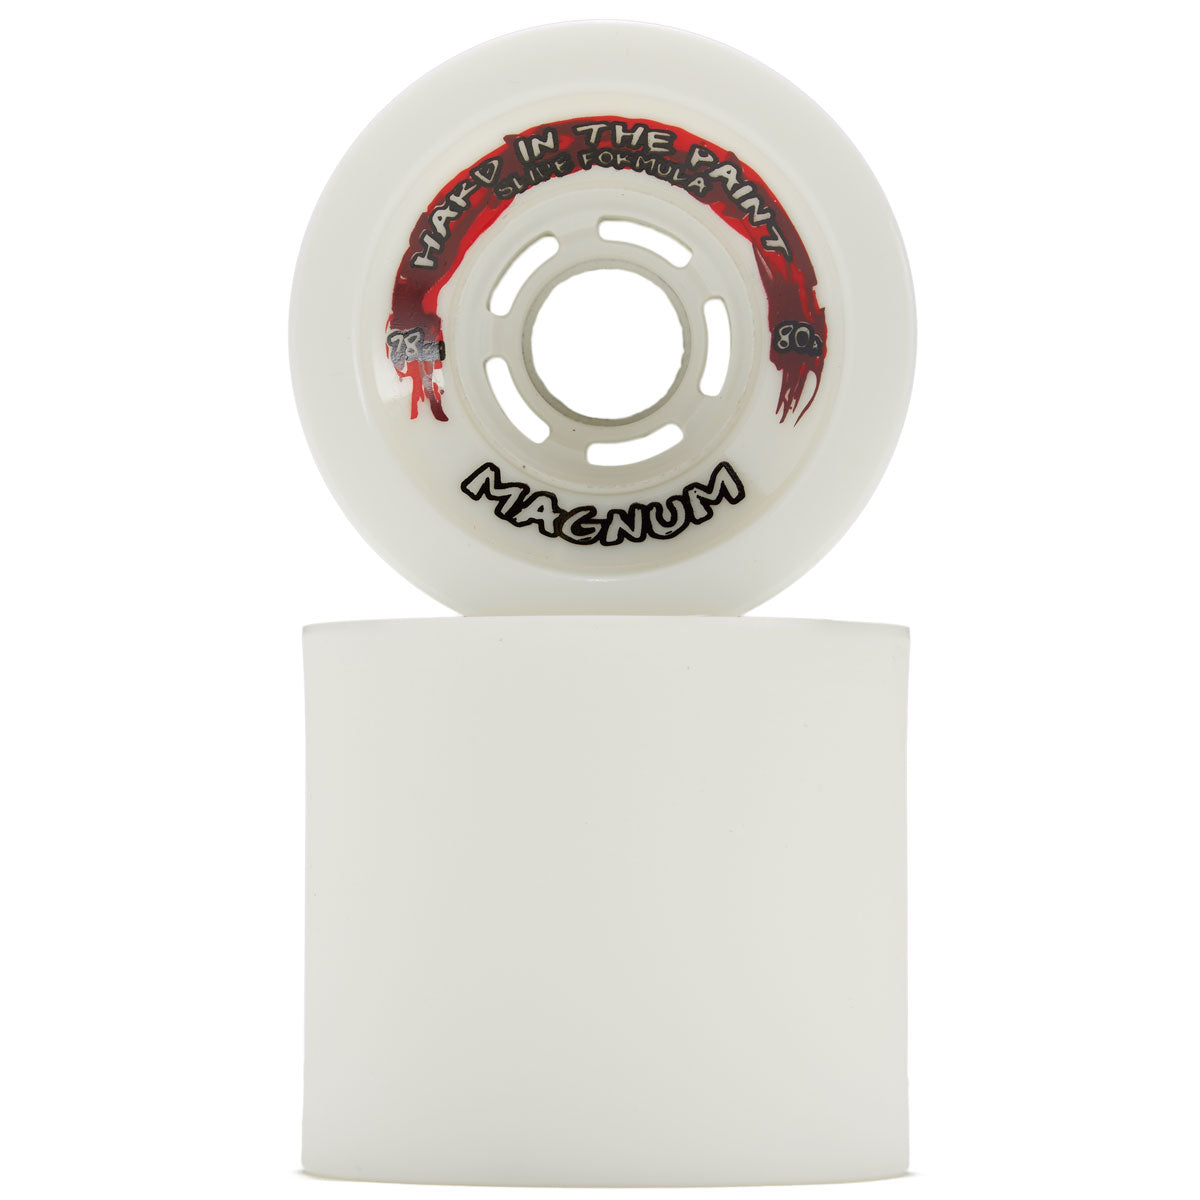 Venom Hard In The Paint Magnum 80a Longboard Wheels - White - 78mm image 2